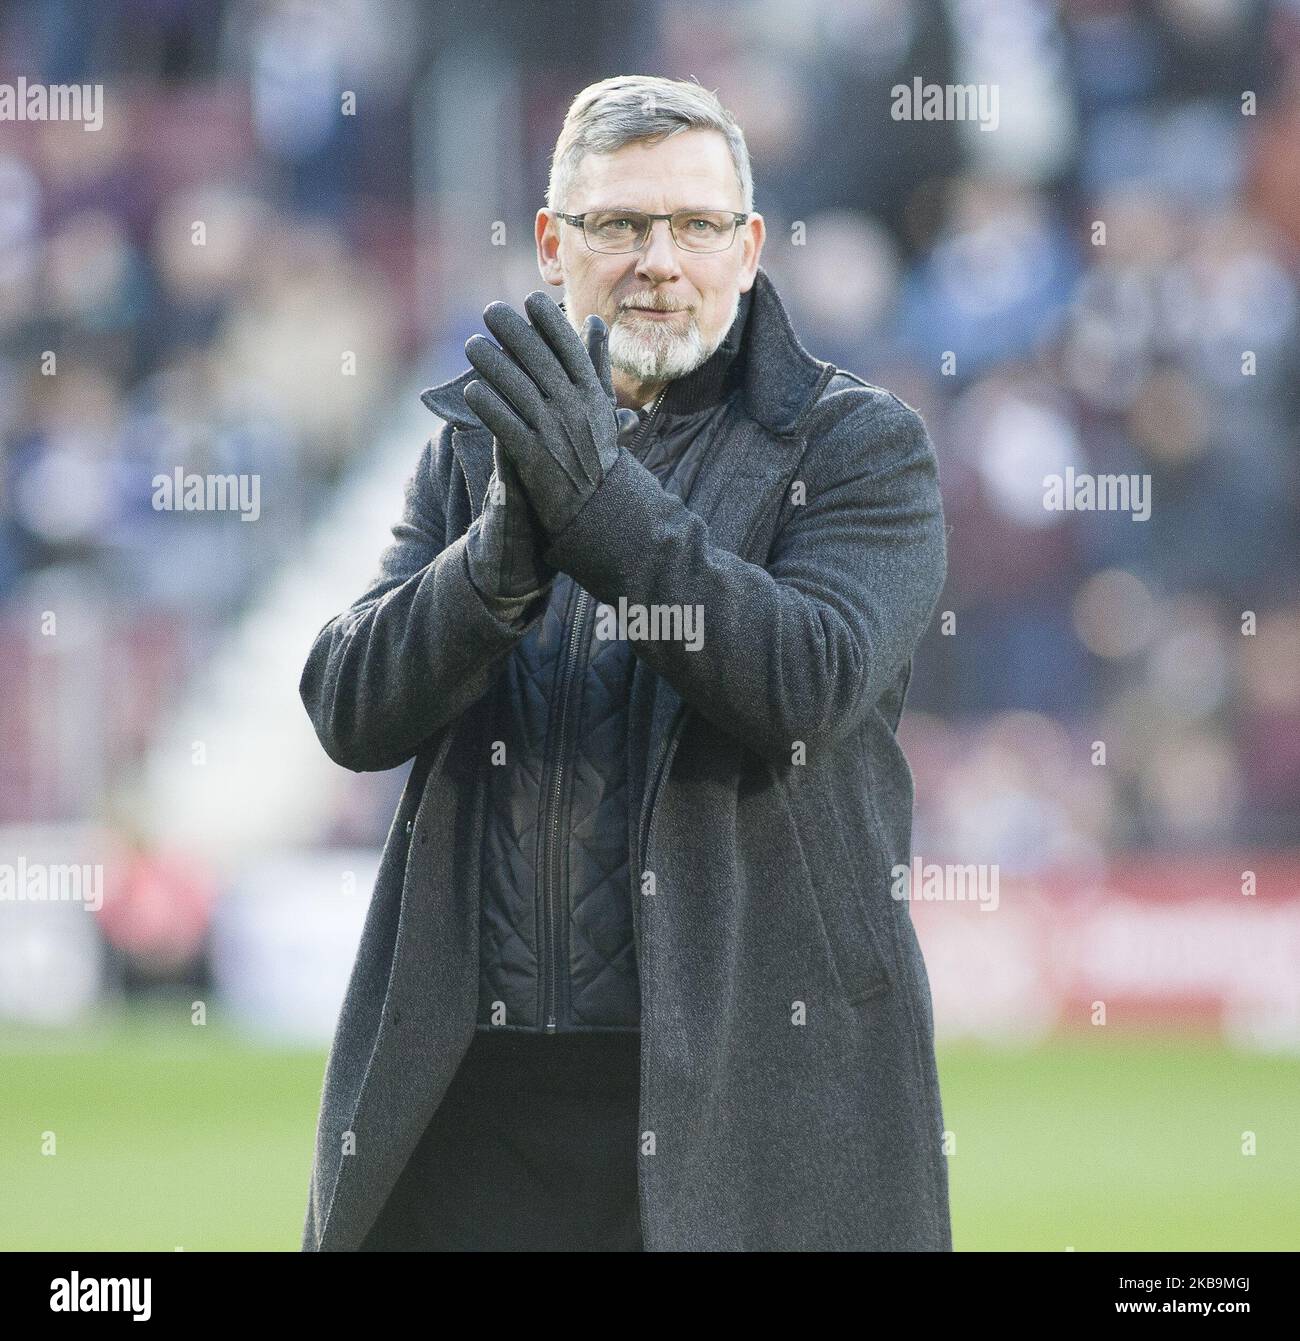 A file photo dated 10 February, 2019 shows Hearts Manager Craig Levein during the William Hill Scottish Cup match between Hearts and Auchinleck Talbot at Tynecastle Park on 10 February, 2019 in Edinbugh, United Kingdom. Craig Levein has been relieved of his first team managerial duties, Austin MacPhee will take charge of first team affairs, on an interim basis as of 31 October, 2019. (Photo by Ewan Bootman/NurPhoto) Stock Photo